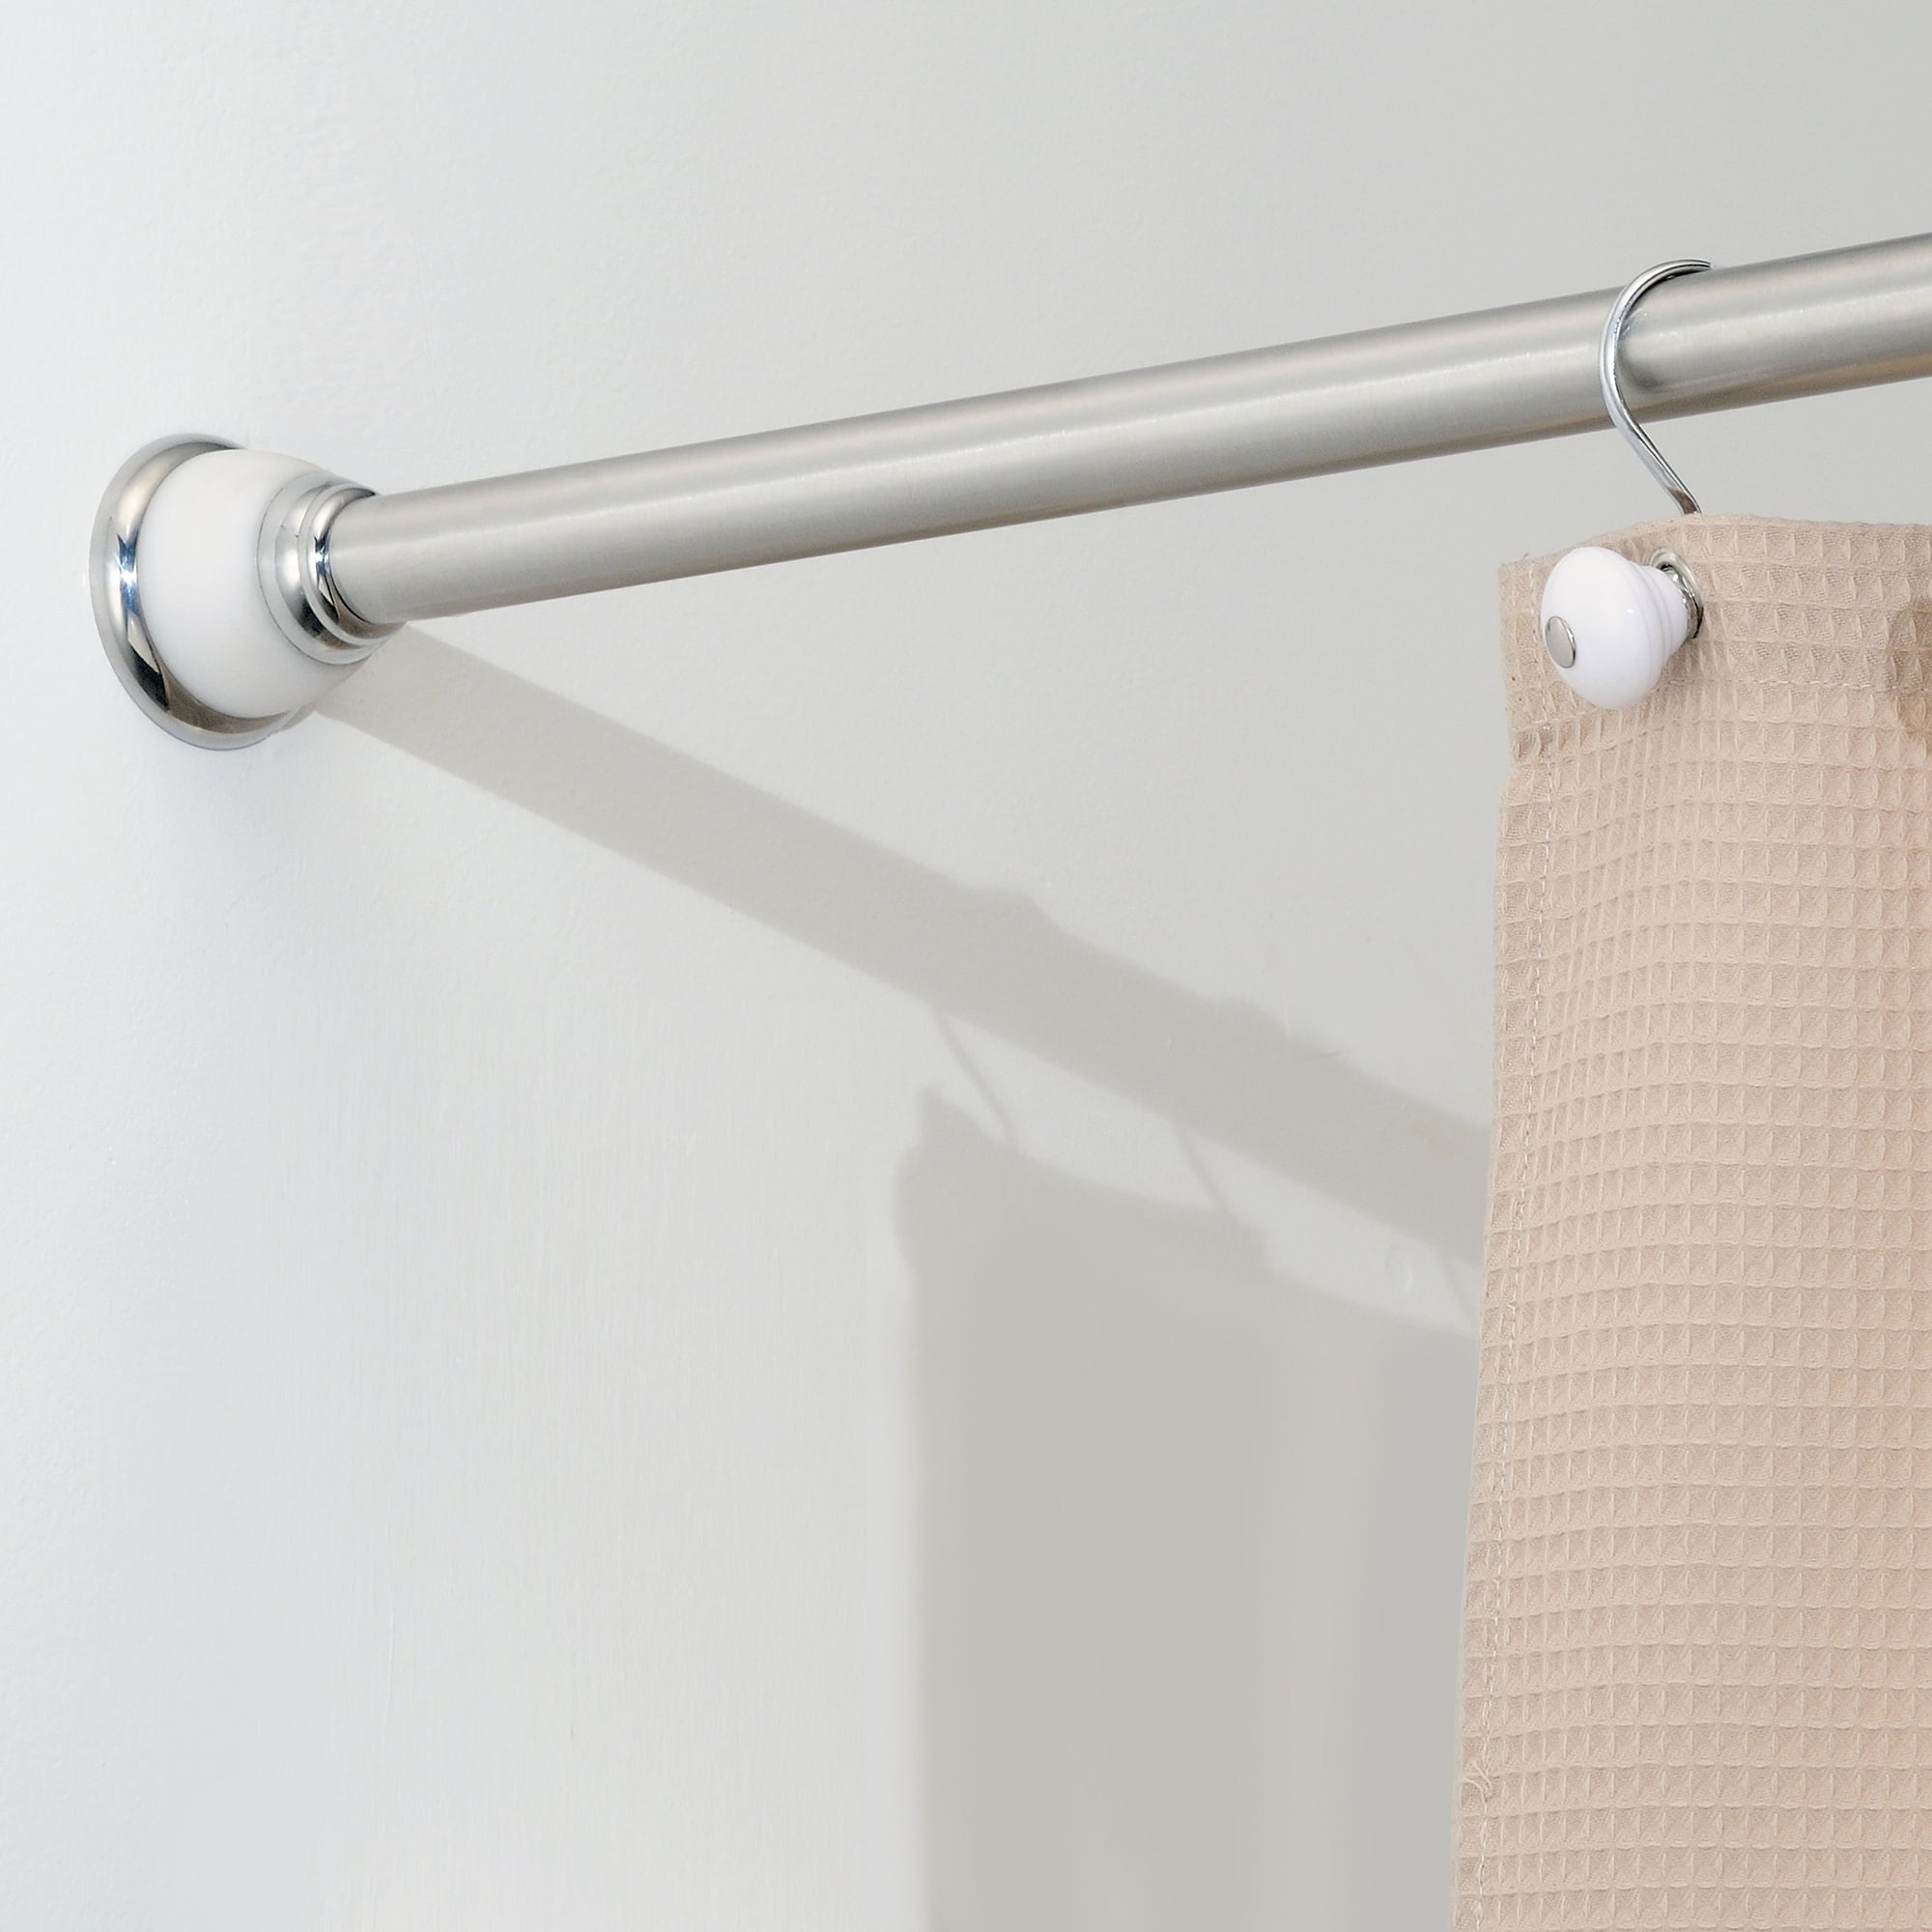 Shower Curtain Tension Rod, Putting Up A Shower Curtain Rod